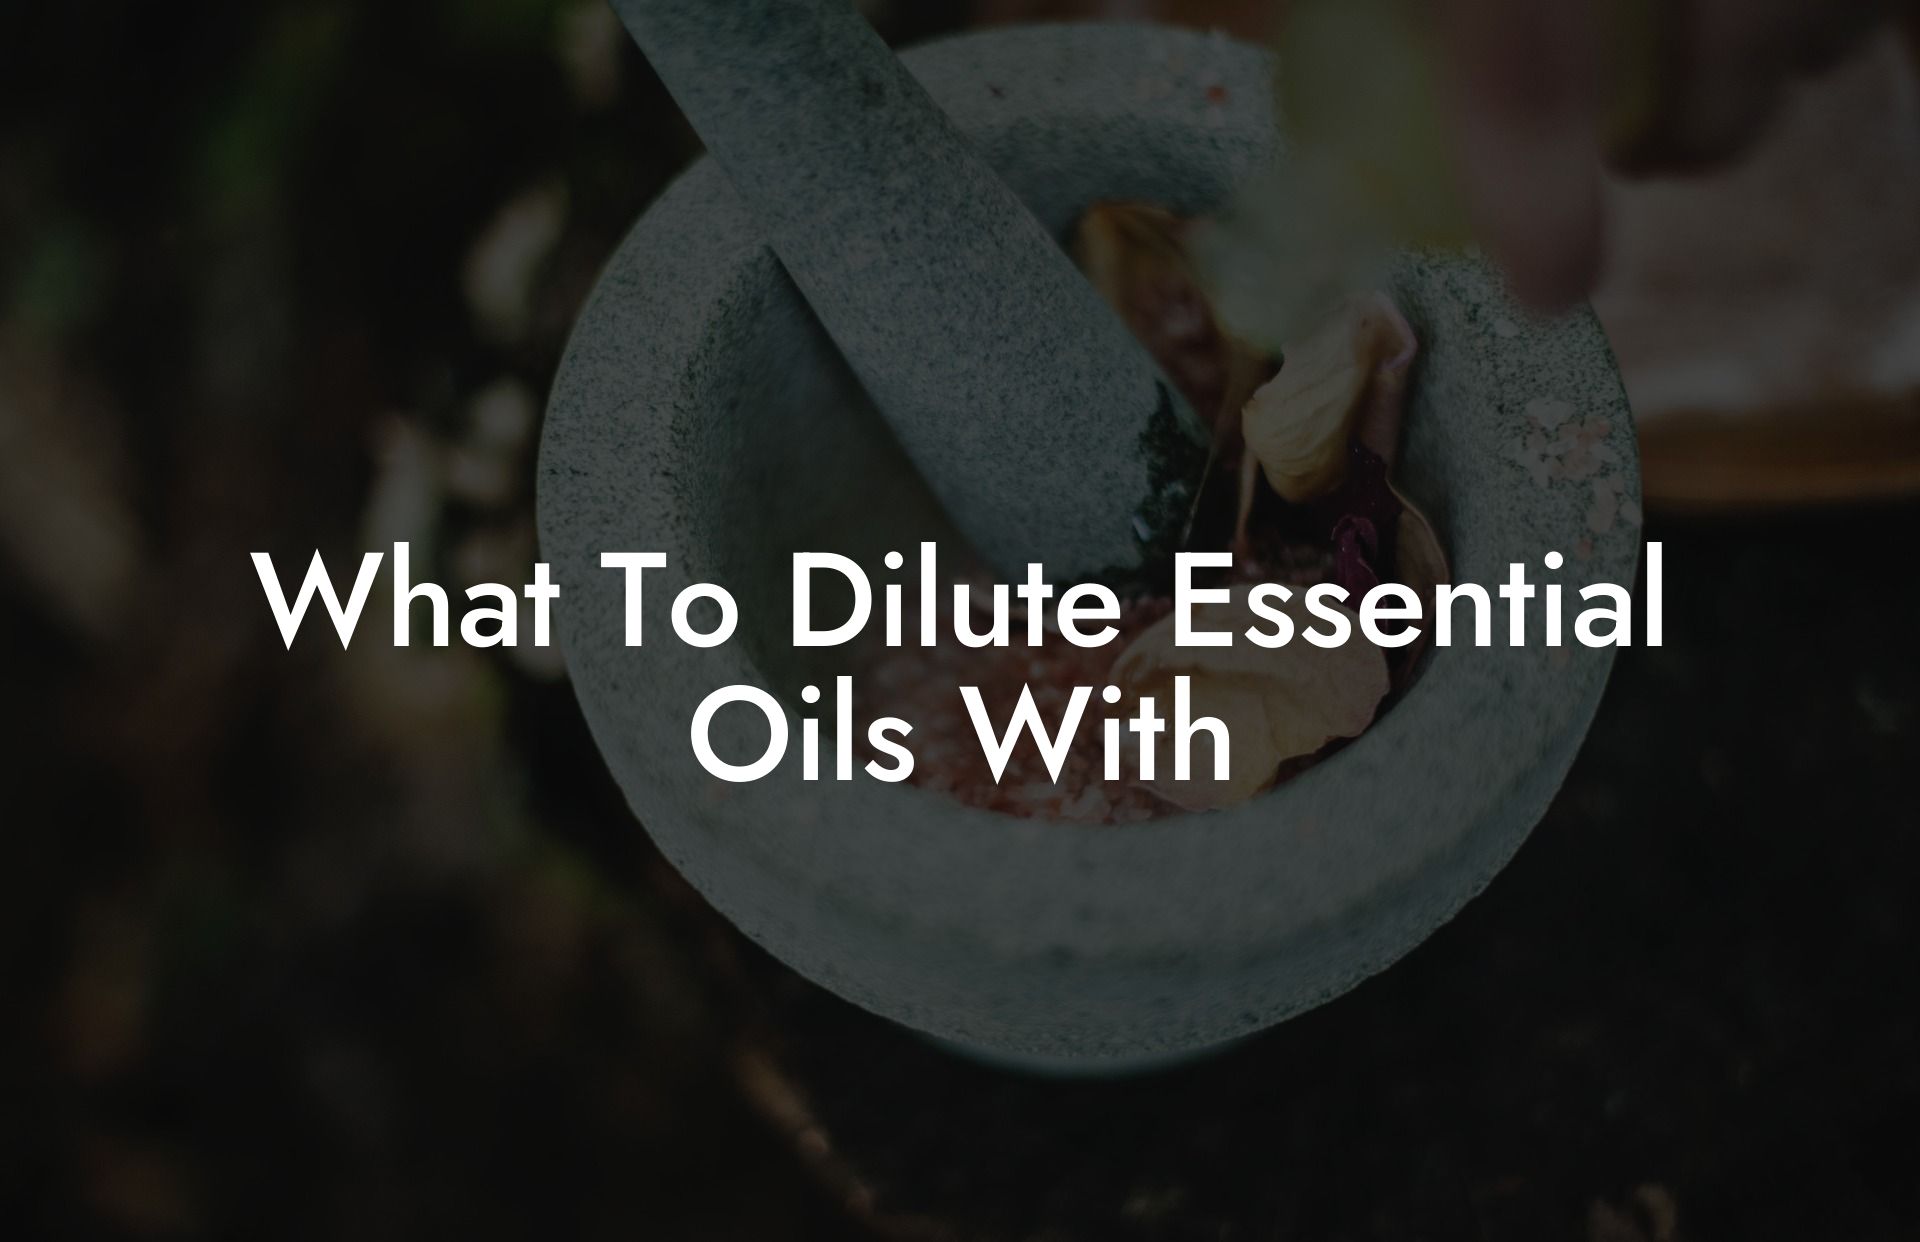 What To Dilute Essential Oils With